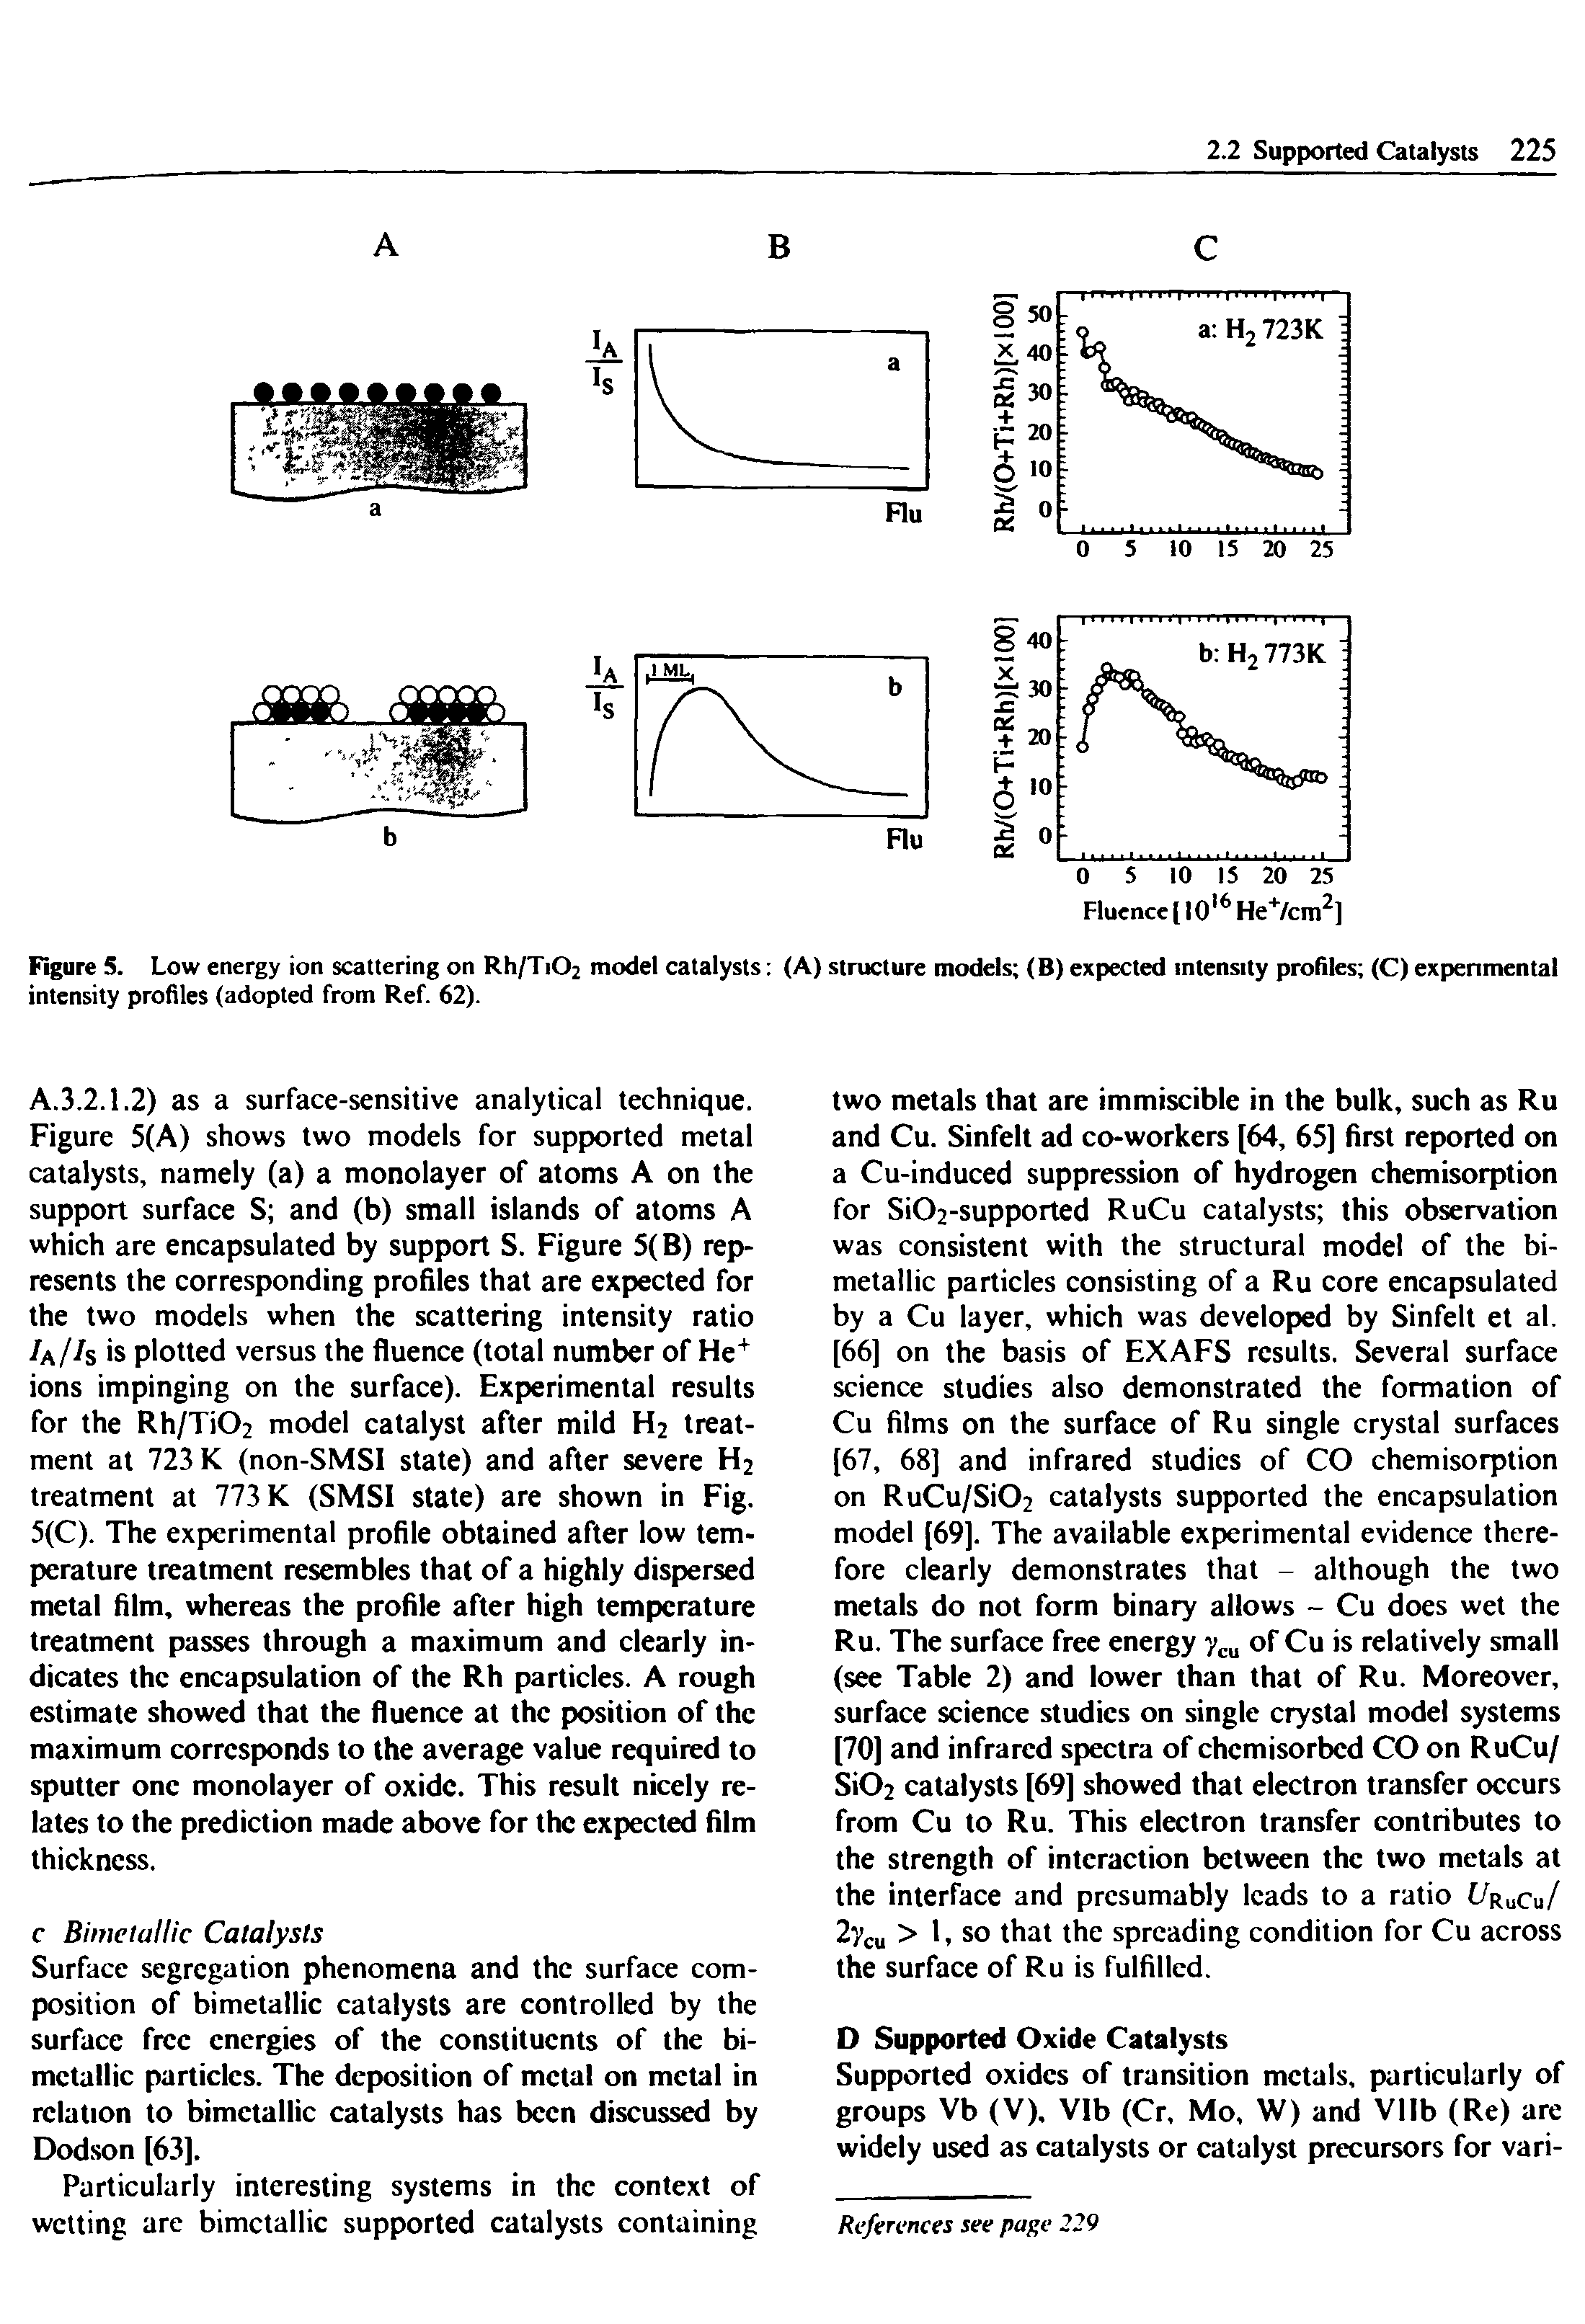 Figure 5. Low energy ion scattering on Rh/TiC>2 model catalysts (A) structure models (B) expected intensity profiles (C) experimental intensity profiles (adopted from Ref. 62).